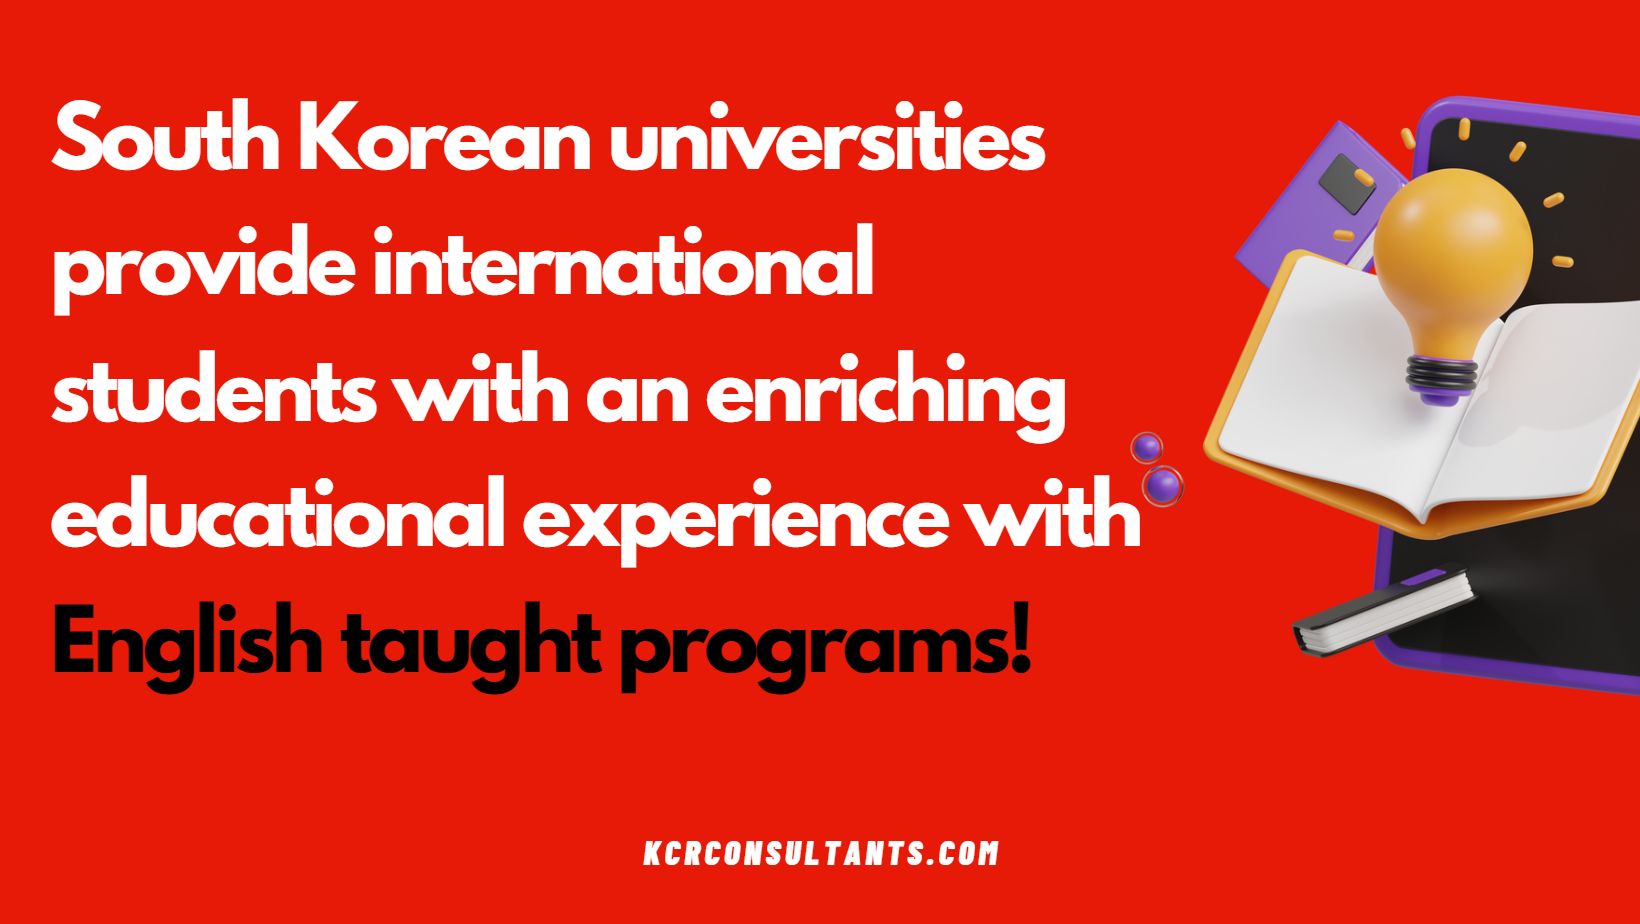 Study in South Korea with English Taught Programs